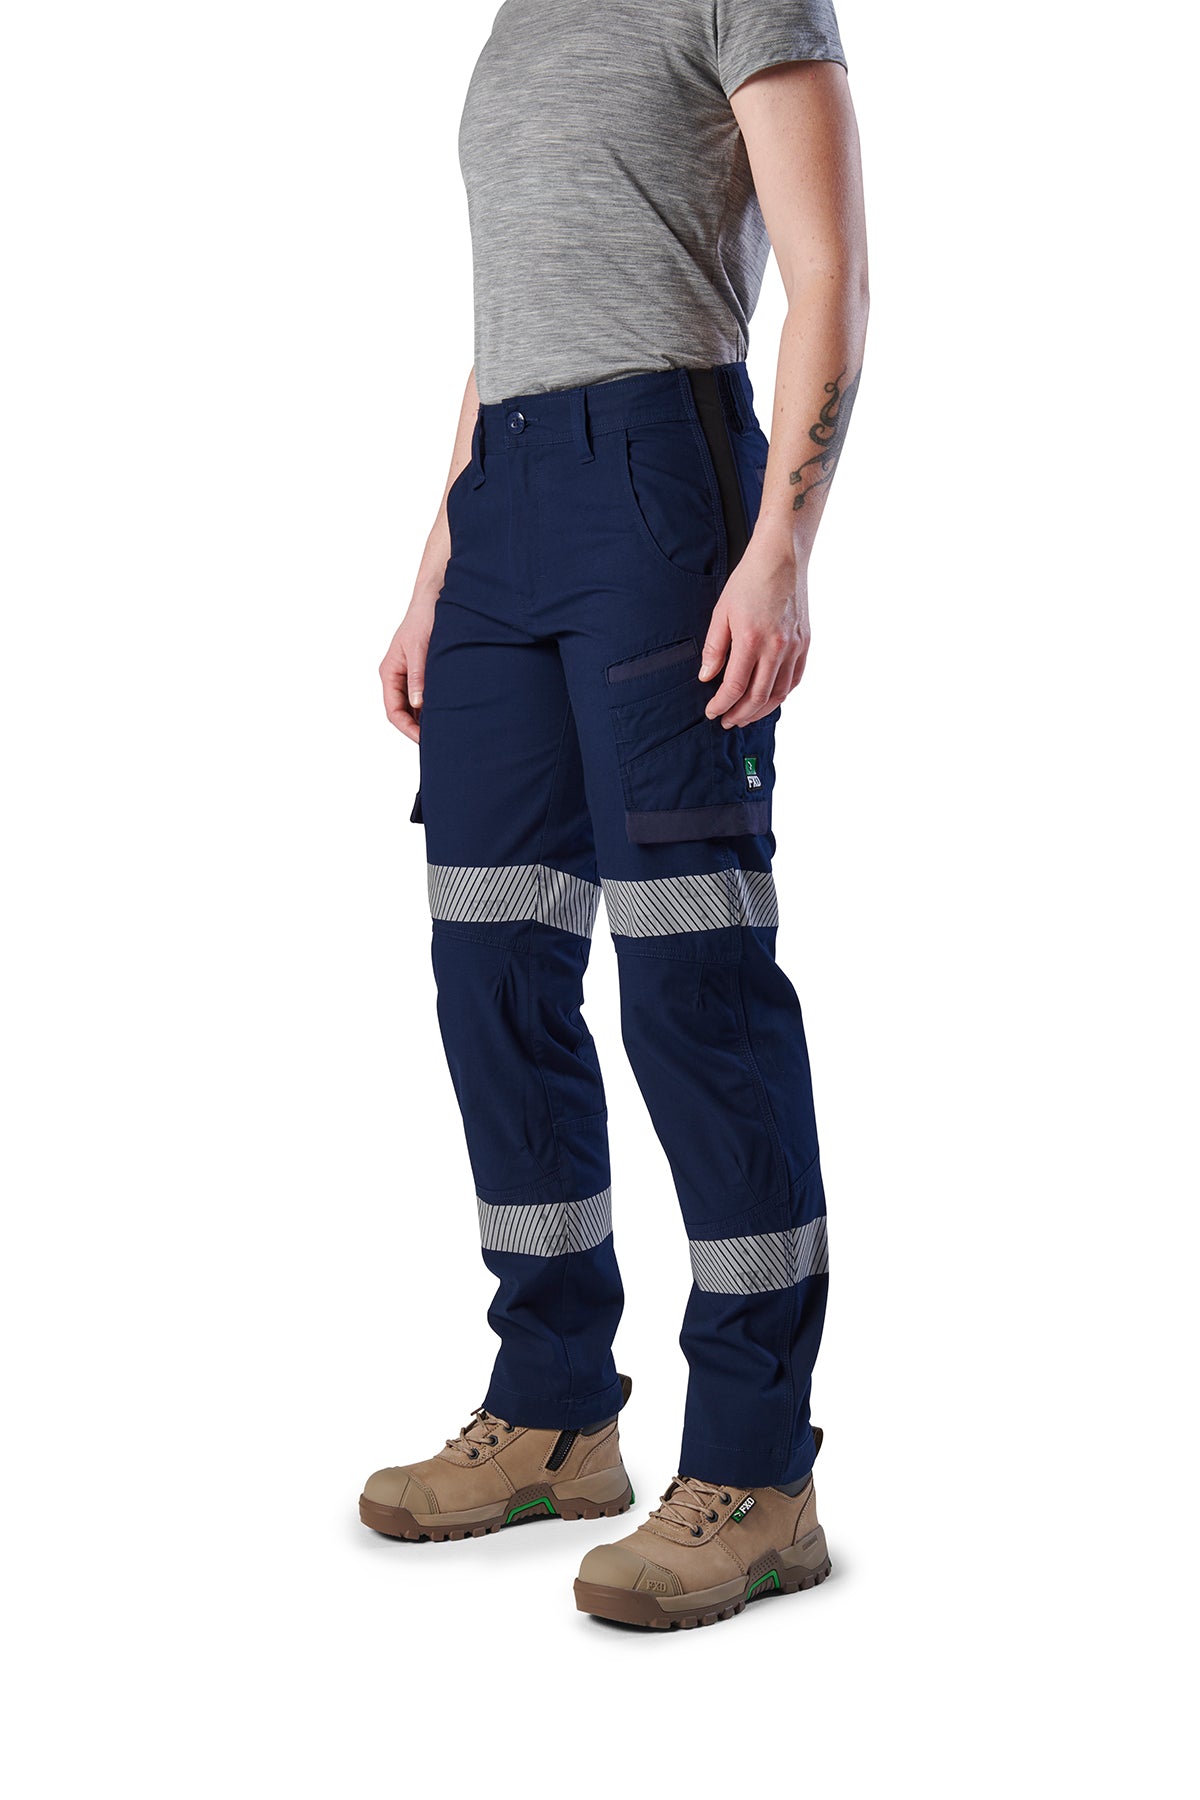 FXD - WP-7WT Womens Taped Work Pant (Navy)